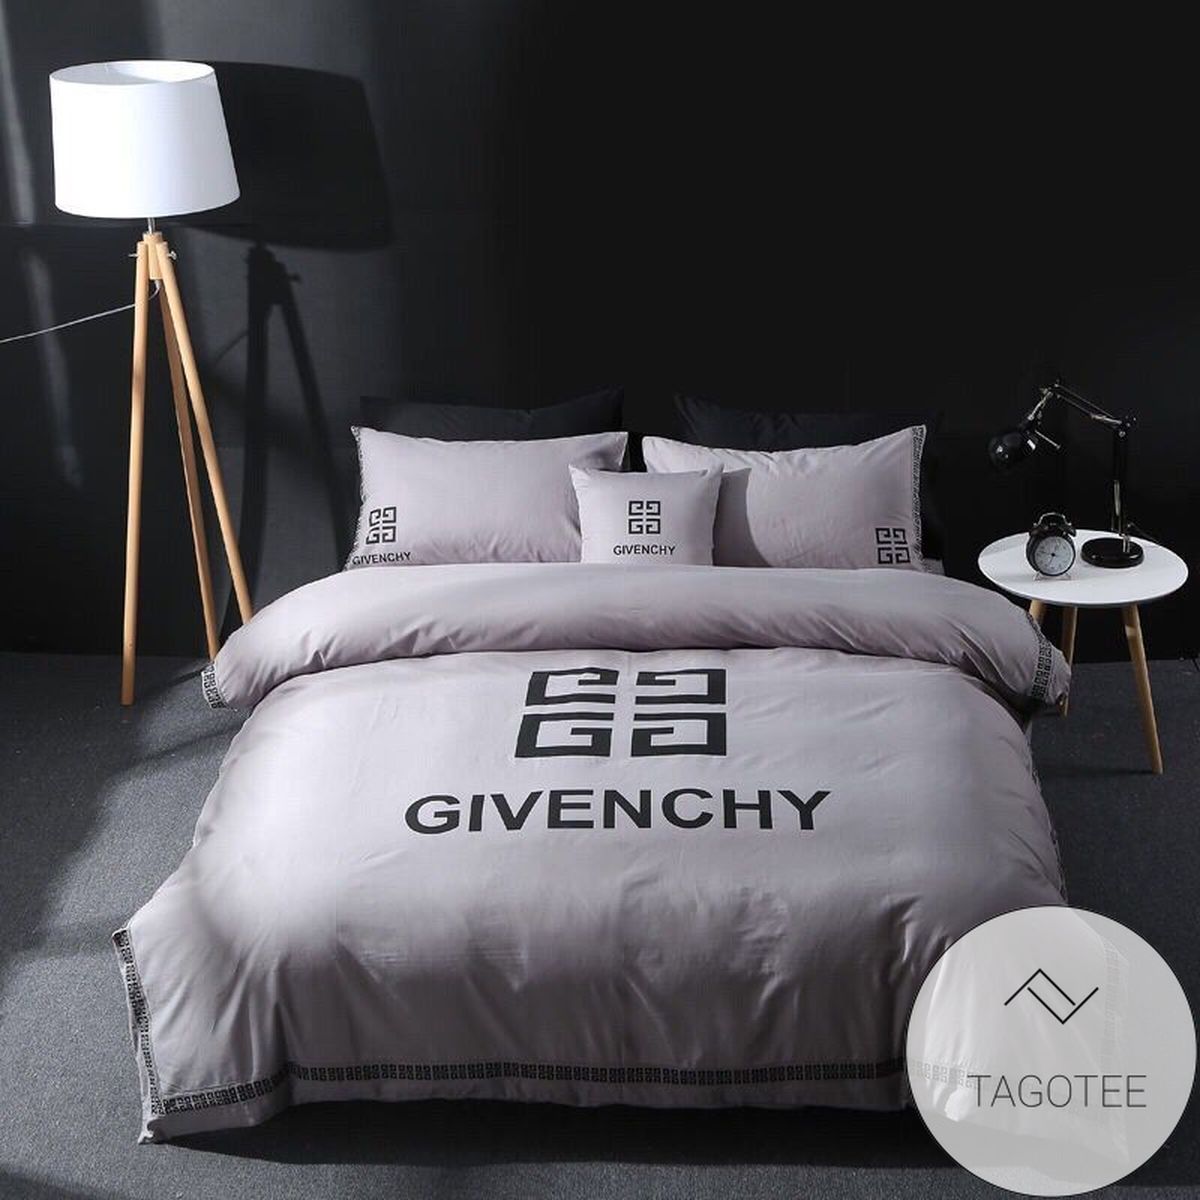 Givenchy White 1 Bedding Sets Duvet Cover Sheet Cover Pillow Cases Luxury Bedroom Sets 2022